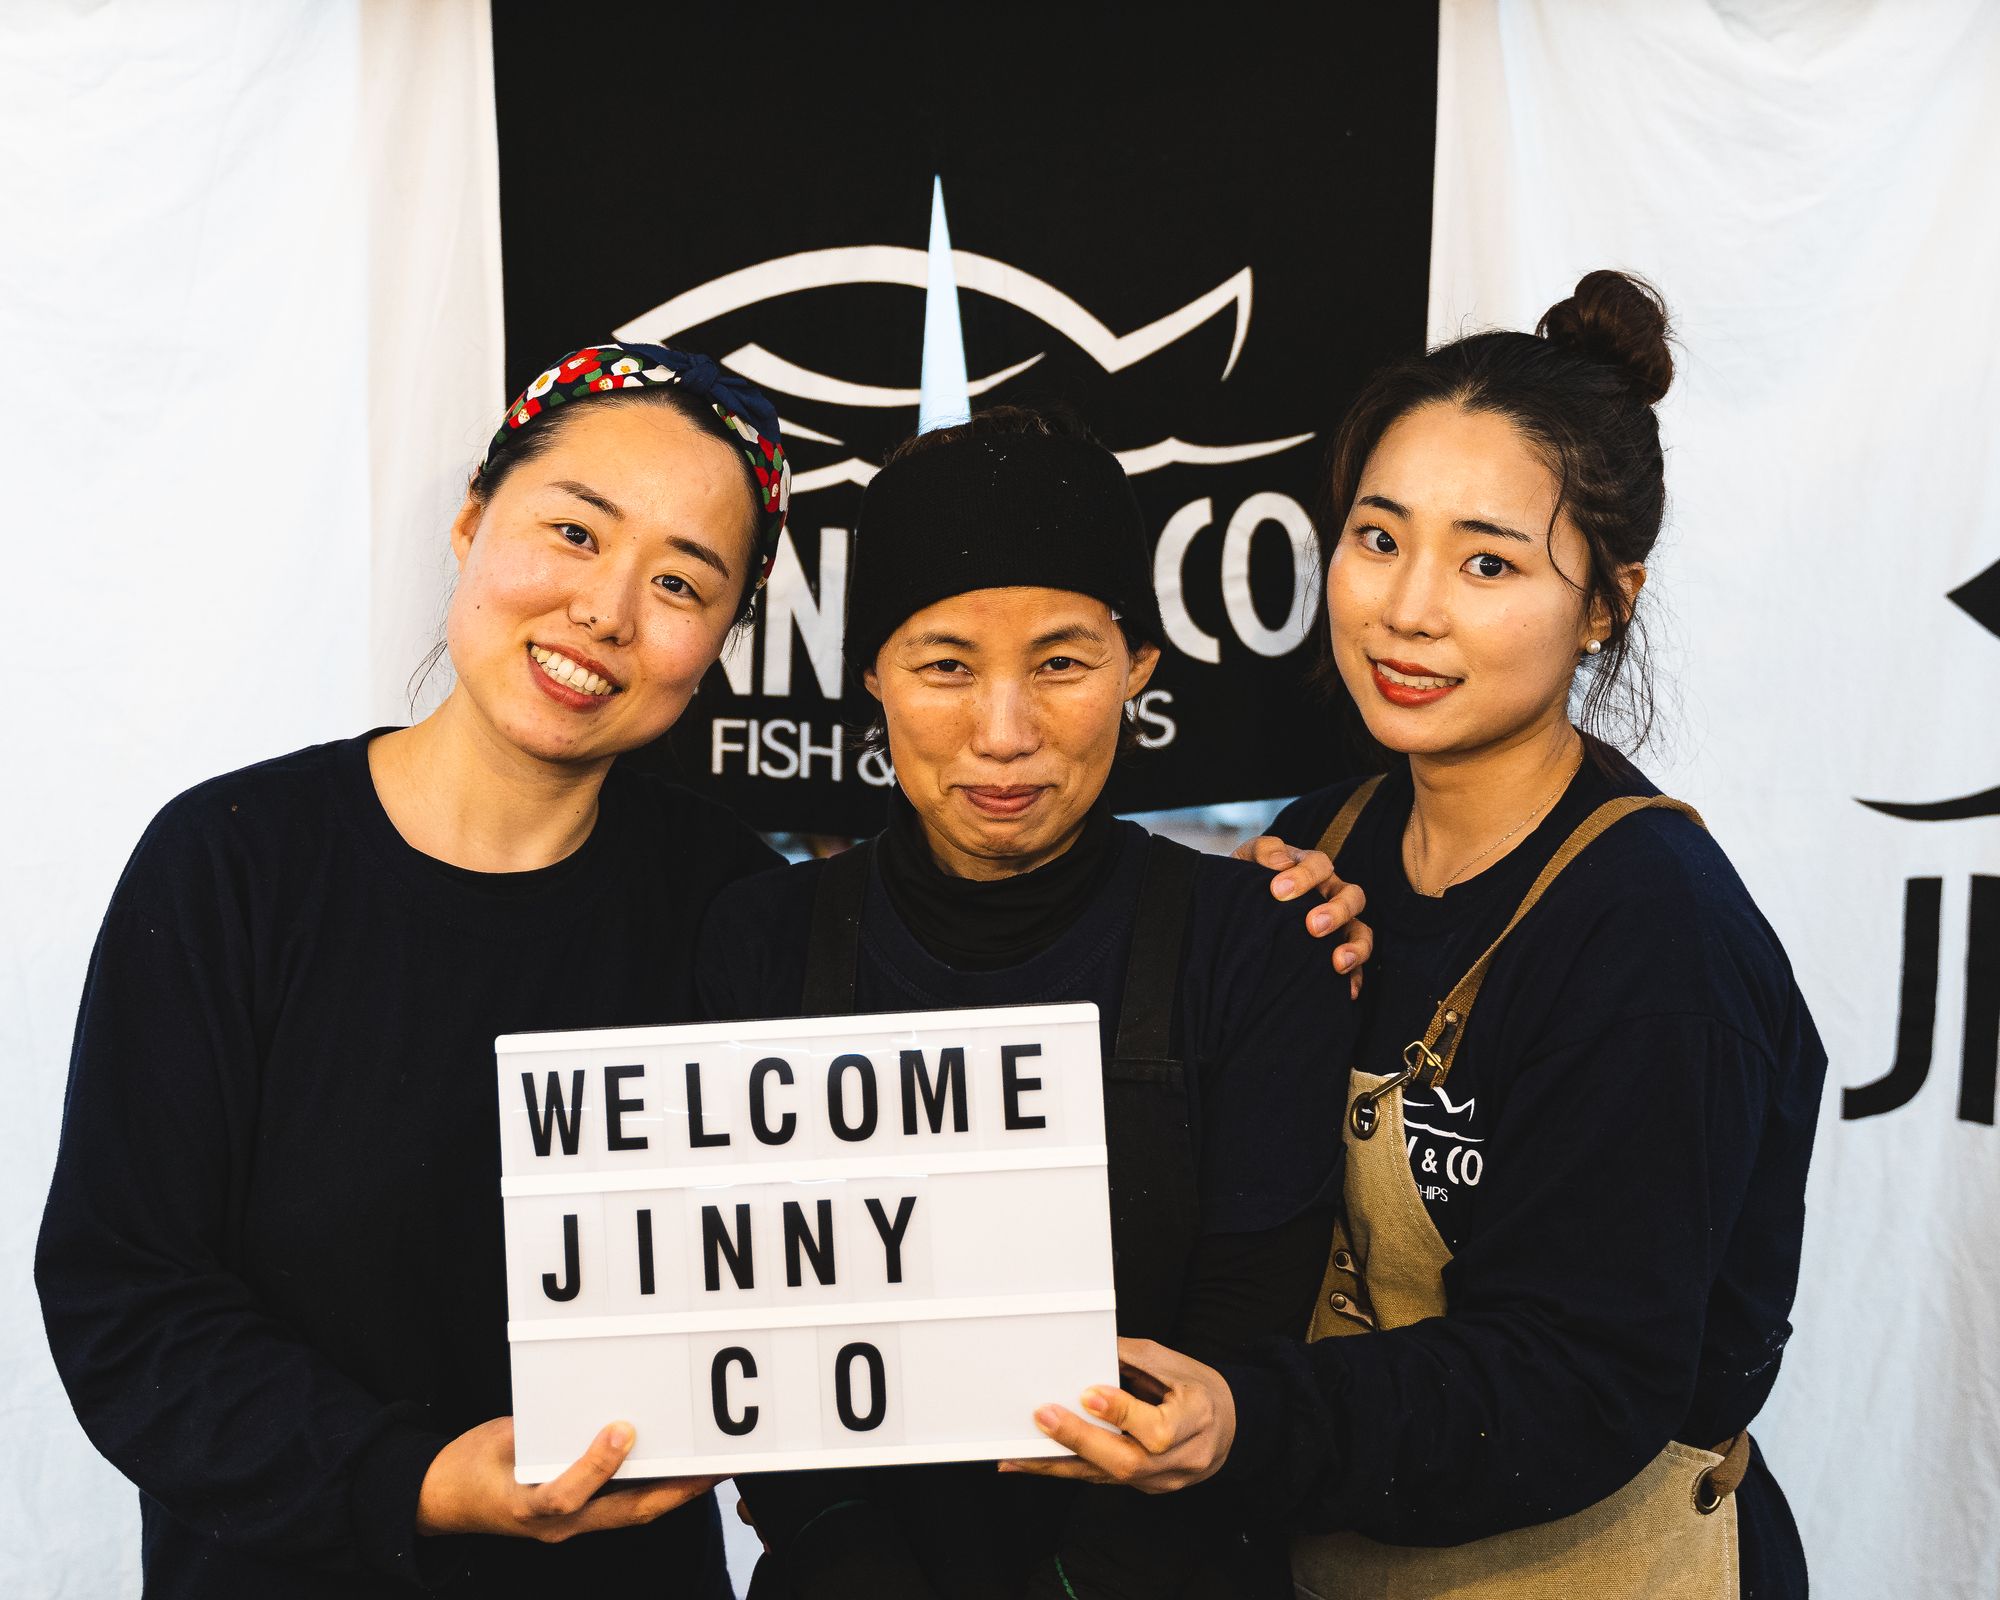 Three Asian women holding a sign that says "Welcome Jinny Co"